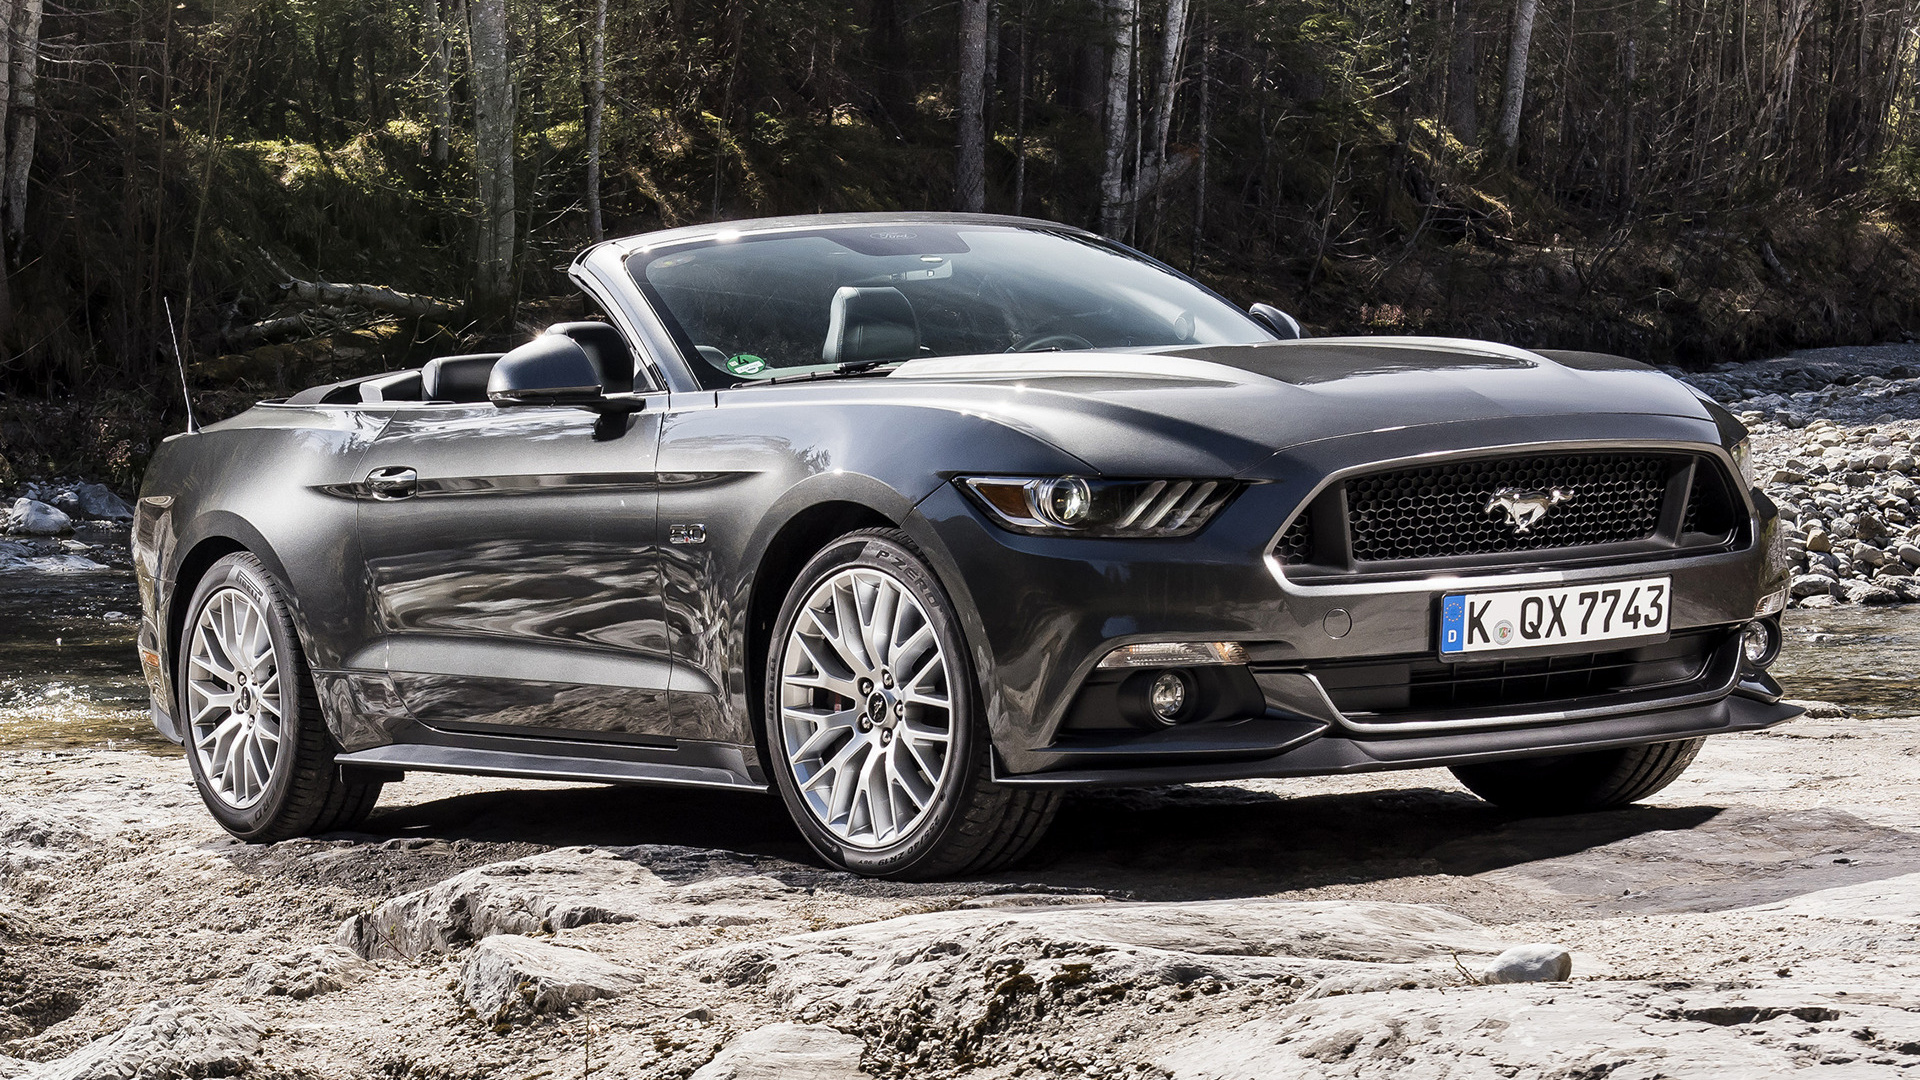 Car Convertible Ford Mustang Gt Muscle Car Silver Car 1920x1080